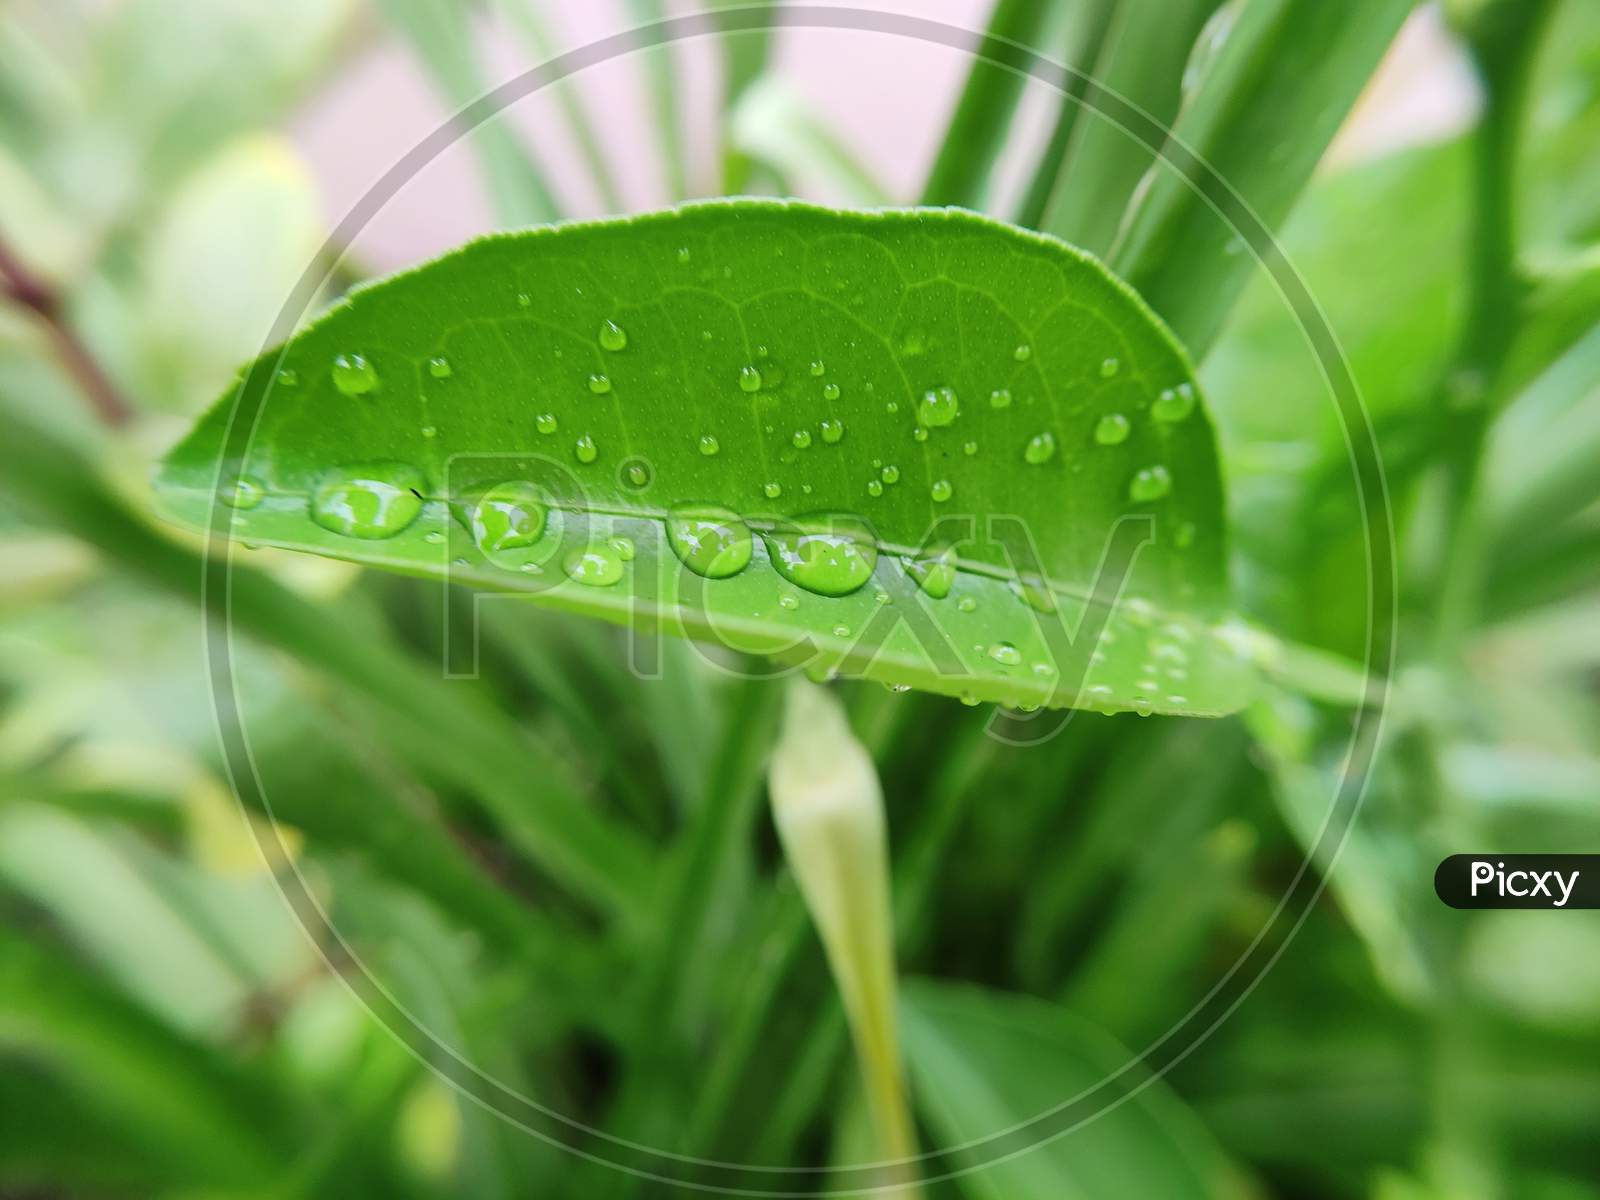 Waterdroplets on leaf with green background, nature concept